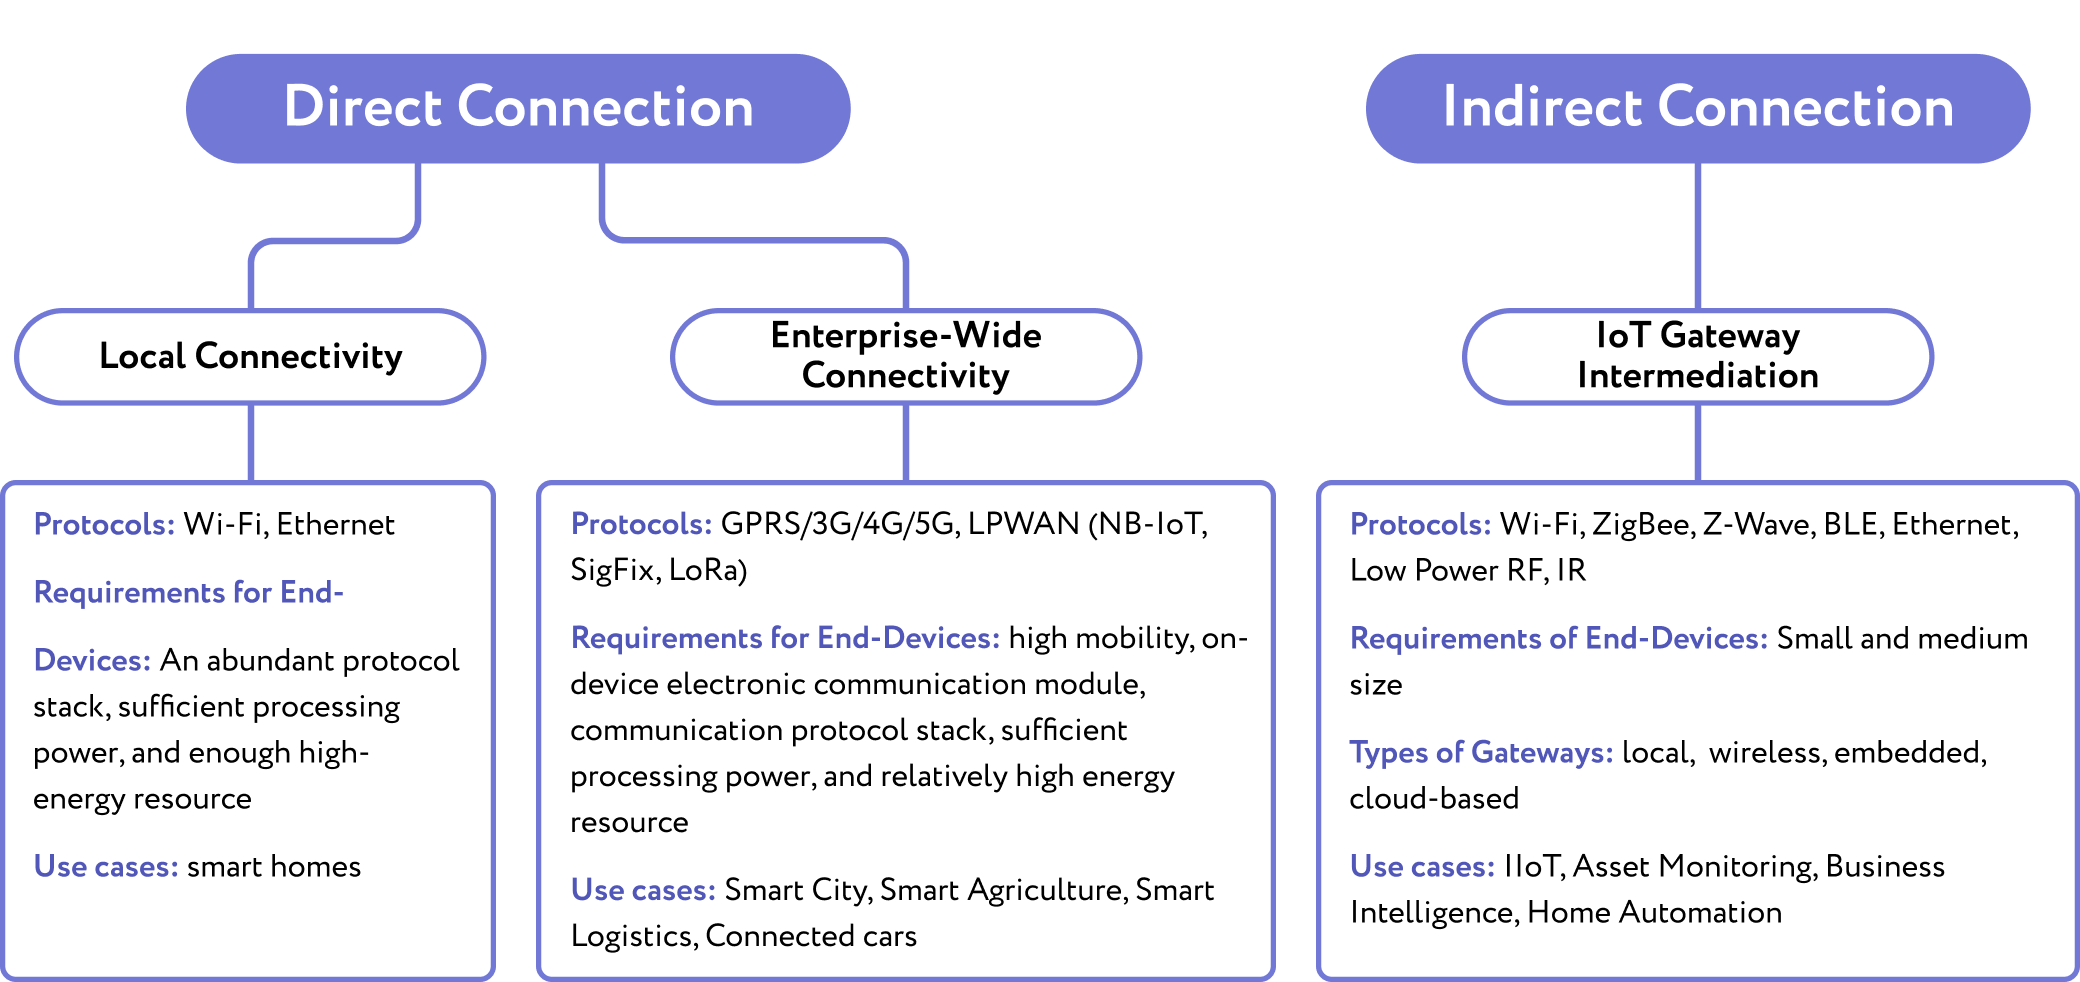 Direct and indirect connectivity opportunities of the IoT deployment